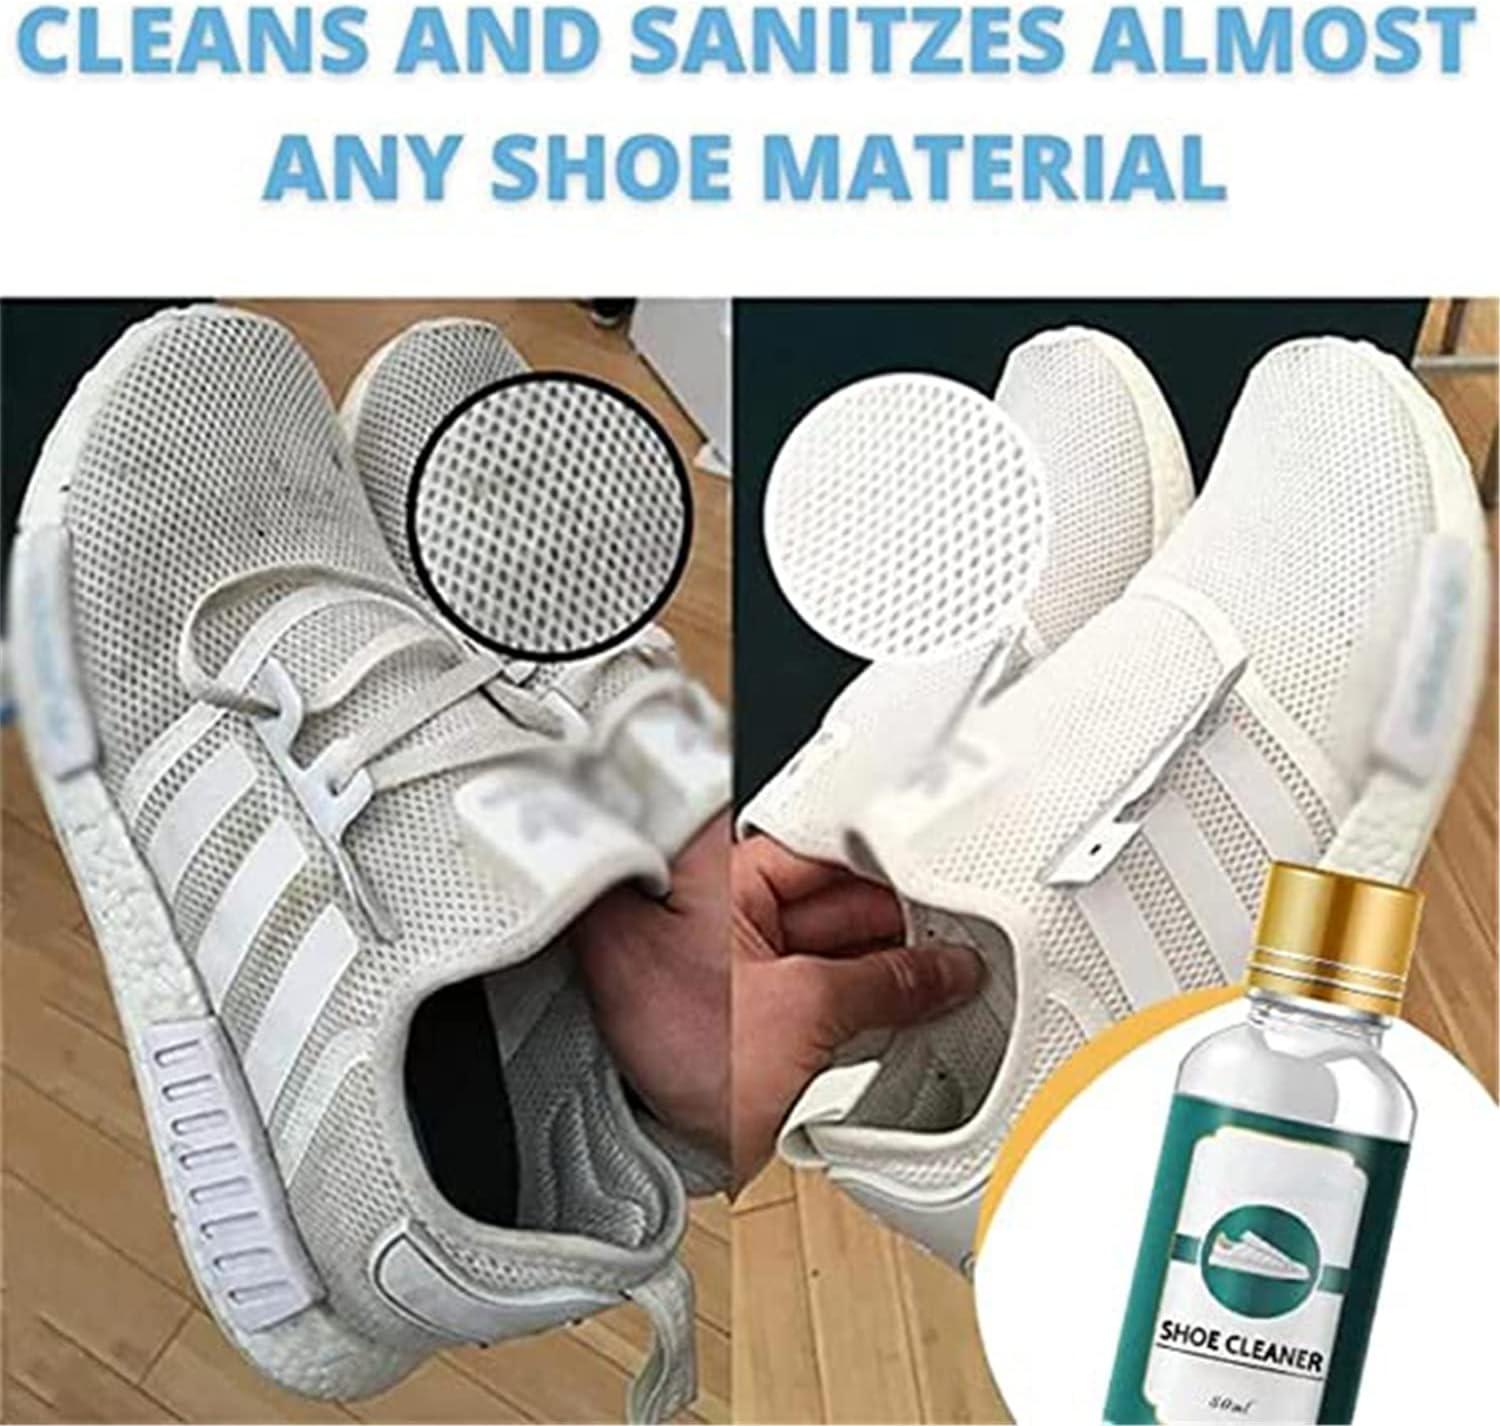 Gochicgolden Shoes Whitening Cleaner,Gothic Golden Shoes Whitening  Cleaner,Multifunctional Leather/Shoes/Handbag Cleaner, Shoe Cleaning Kit  for Sneakers (1pcs)